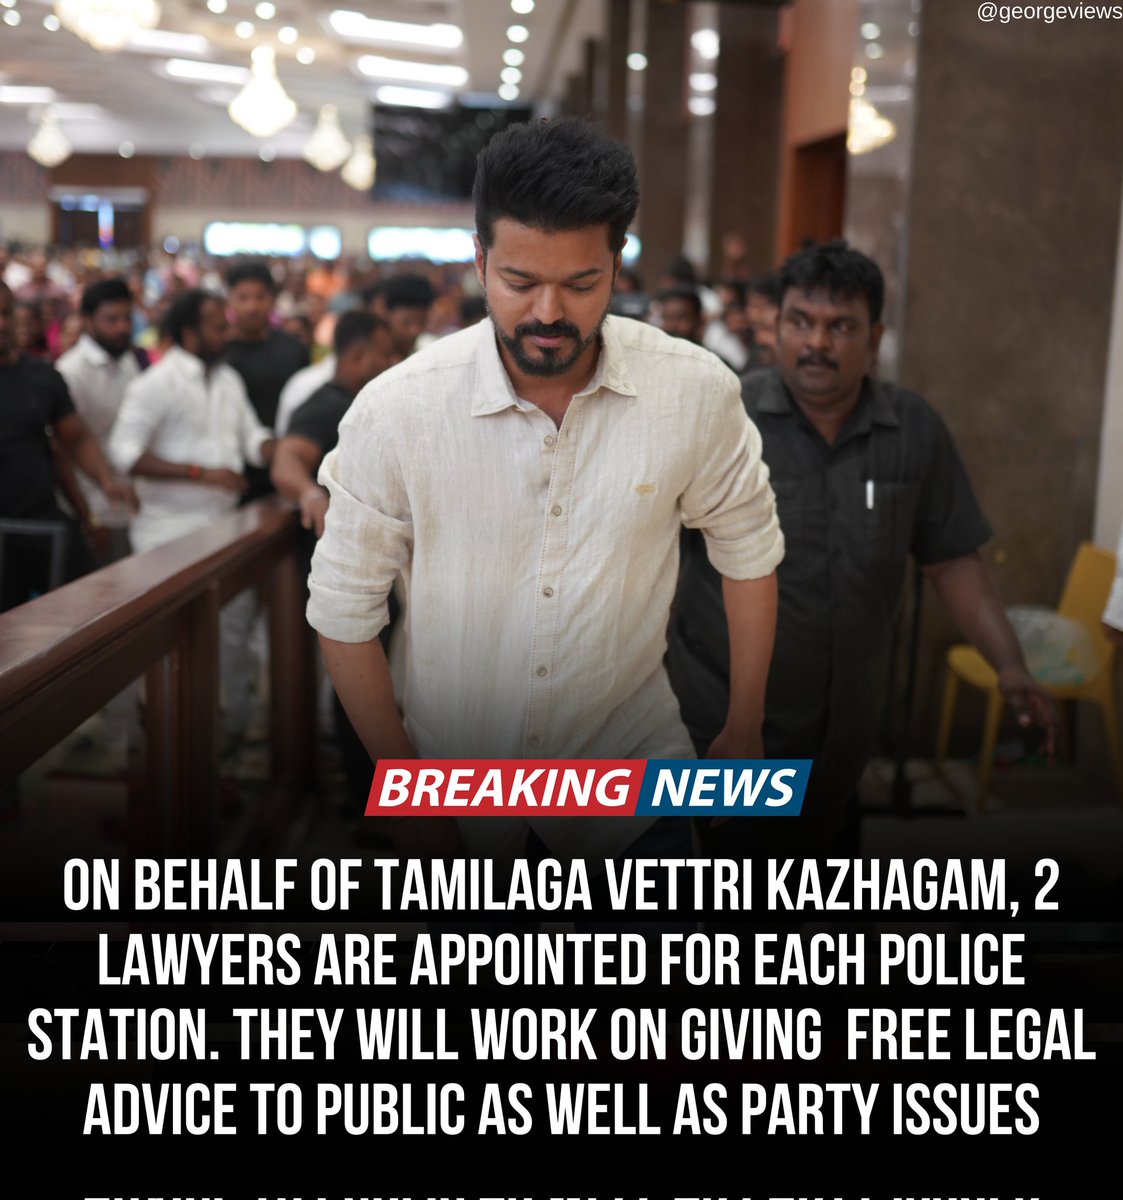 BIG BREAKING 🚨 #ThalapathyVijay's #TVK makes its next move, appoints 2 lawyers for each police station who will help people in solving their issues legally at free of cost. 🫡 #தமிழகவெற்றிக்கழகம்